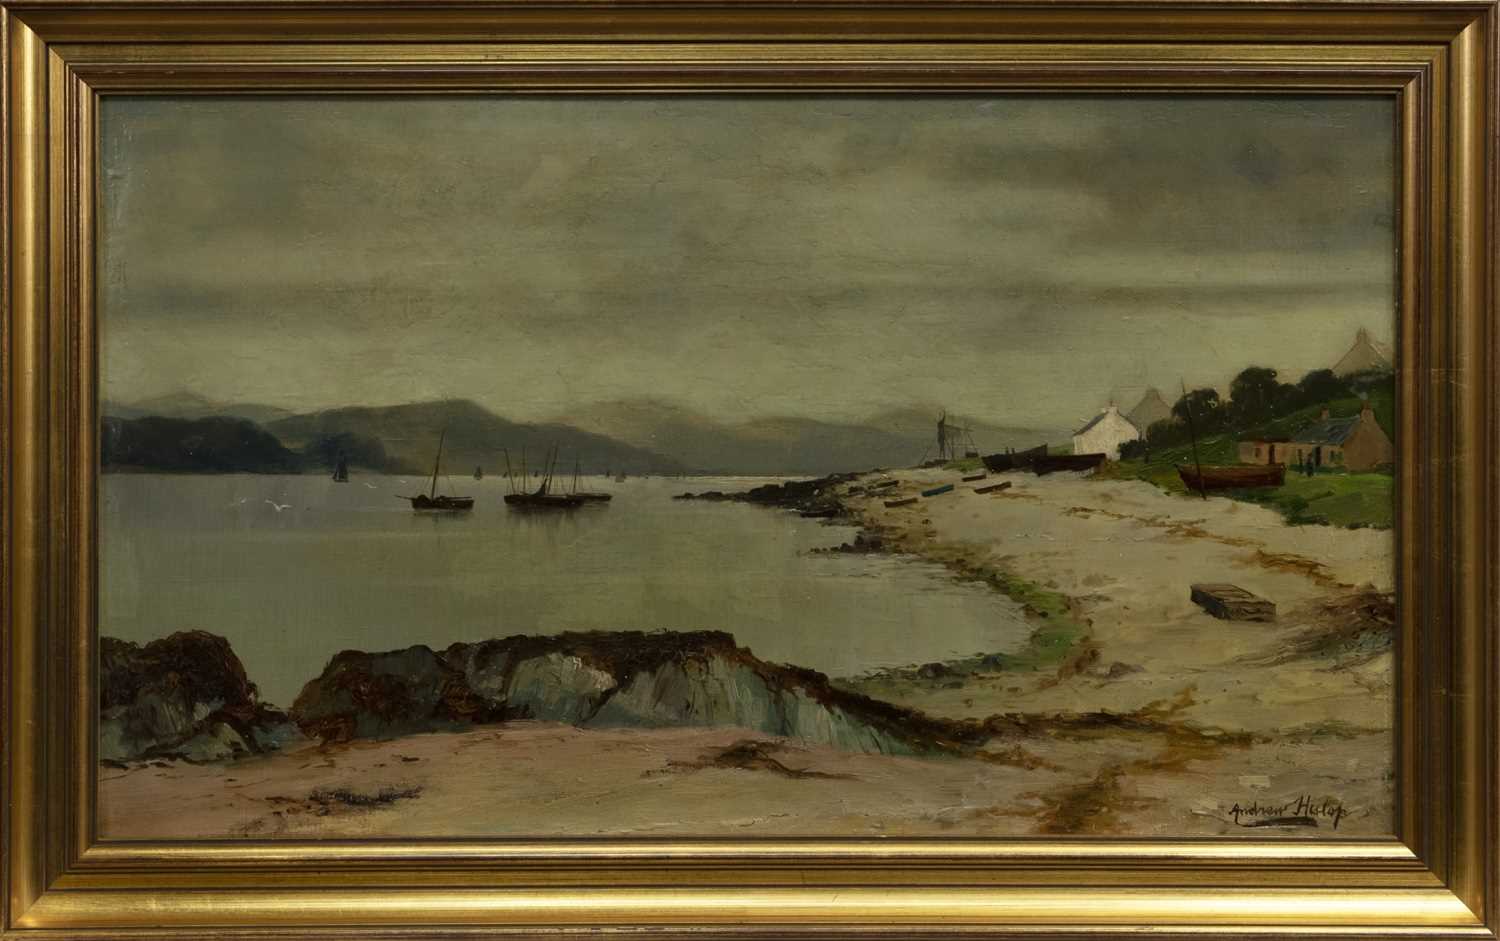 Lot 76 - SHORE OF THE LOCH, AN OIL BY ANDREW HISLOP